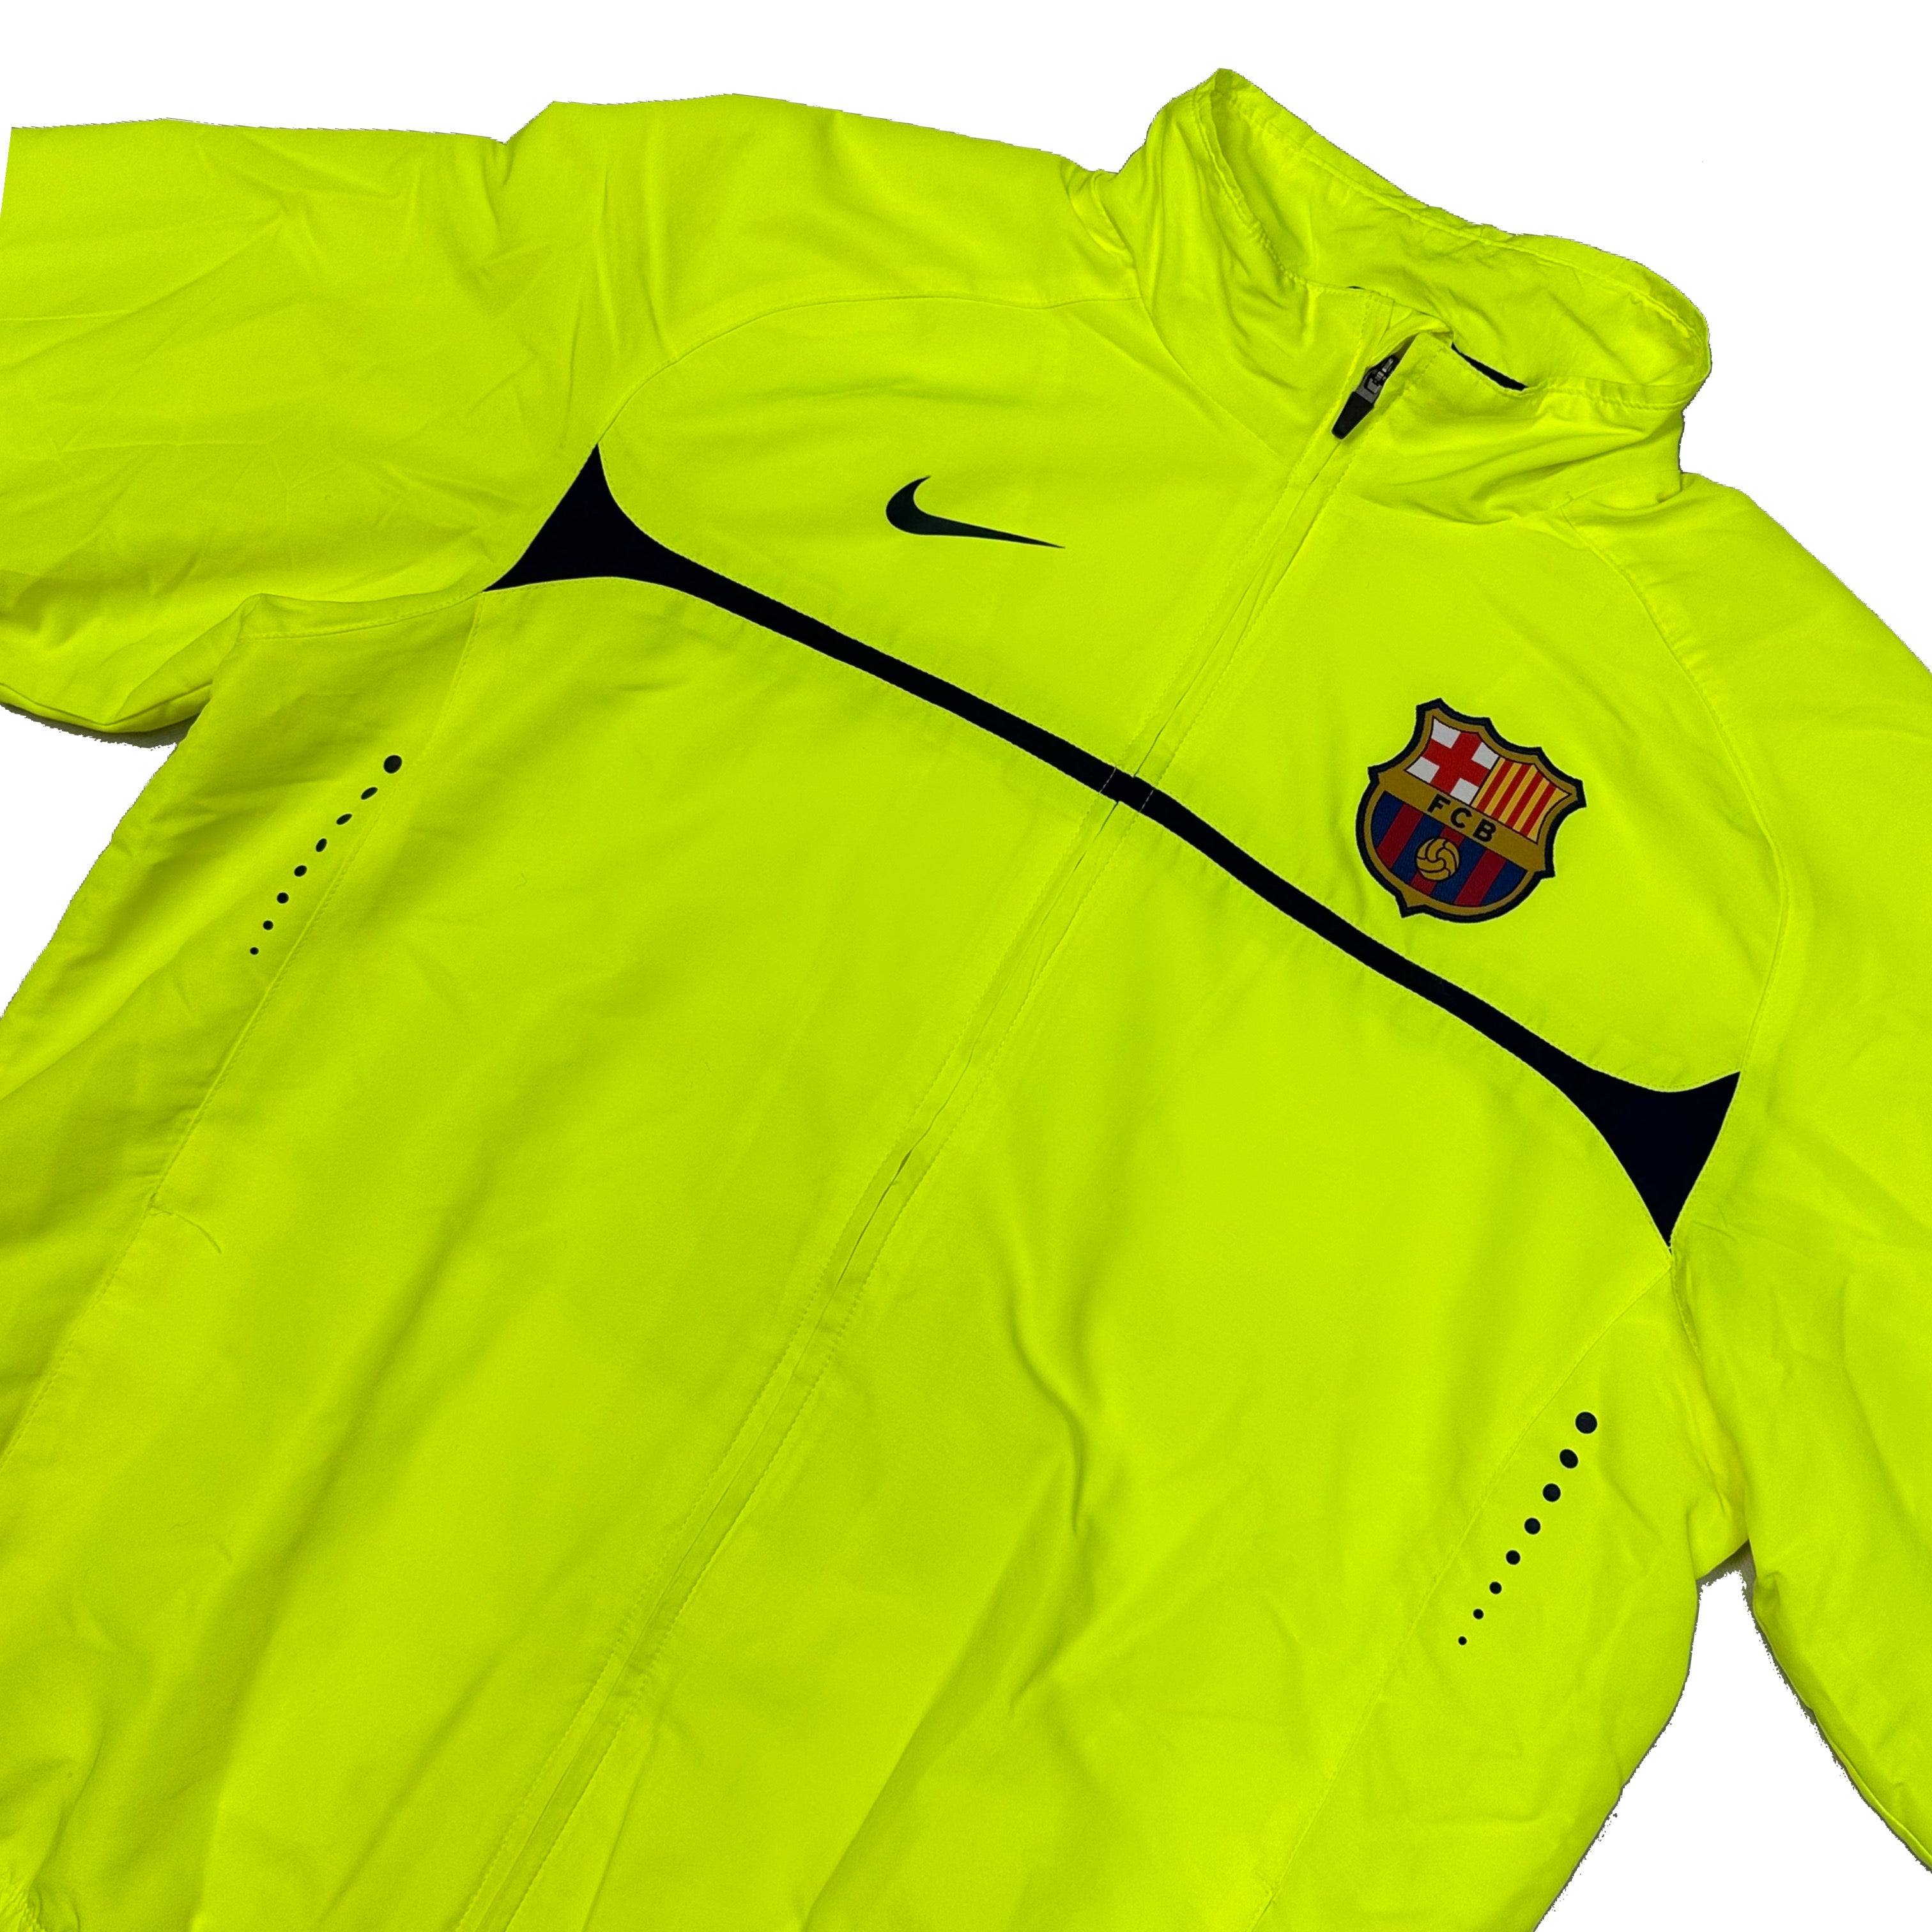 Nike Barcelona 2010/11 Tracksuit Top In Fluorescent Green ( XL )